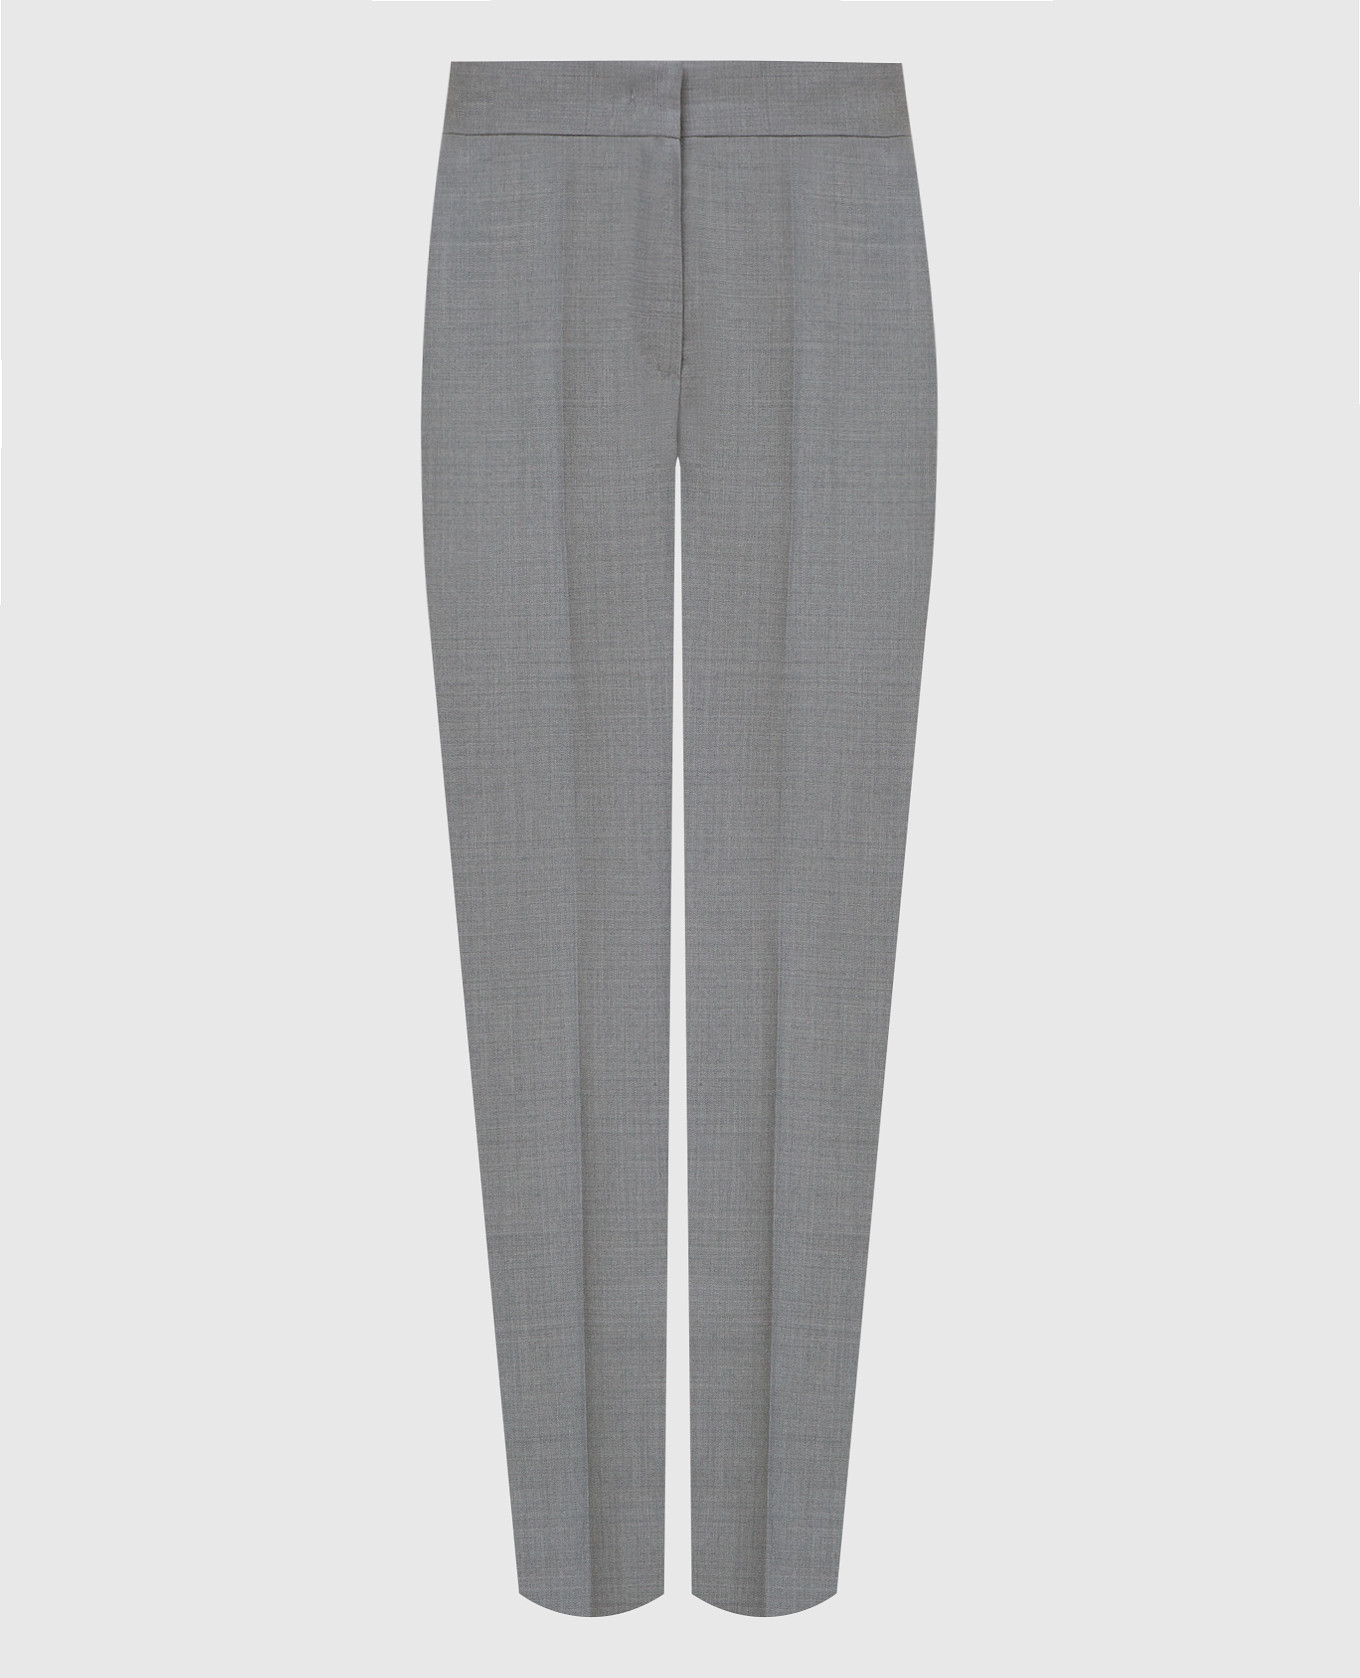 Bellico Gray Wool Chinos